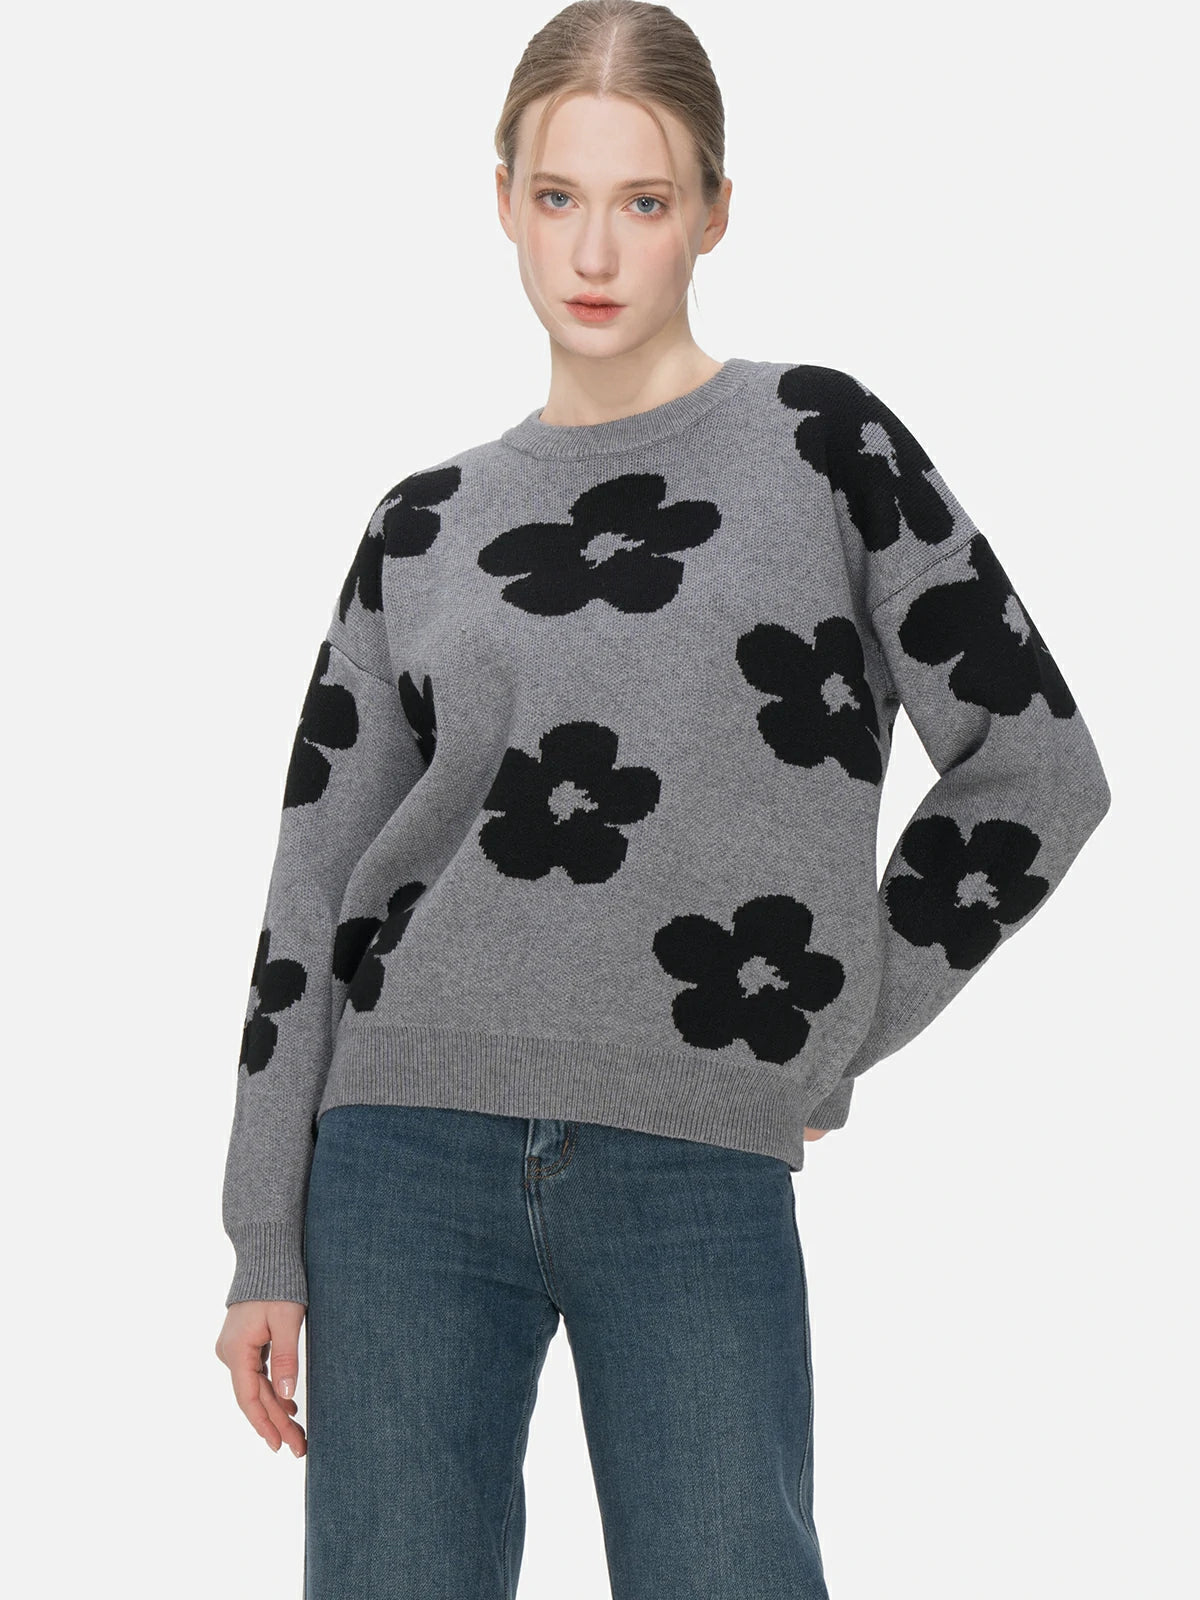 Versatile fashion piece - gray sweater with a relaxed fit and lively floral pattern